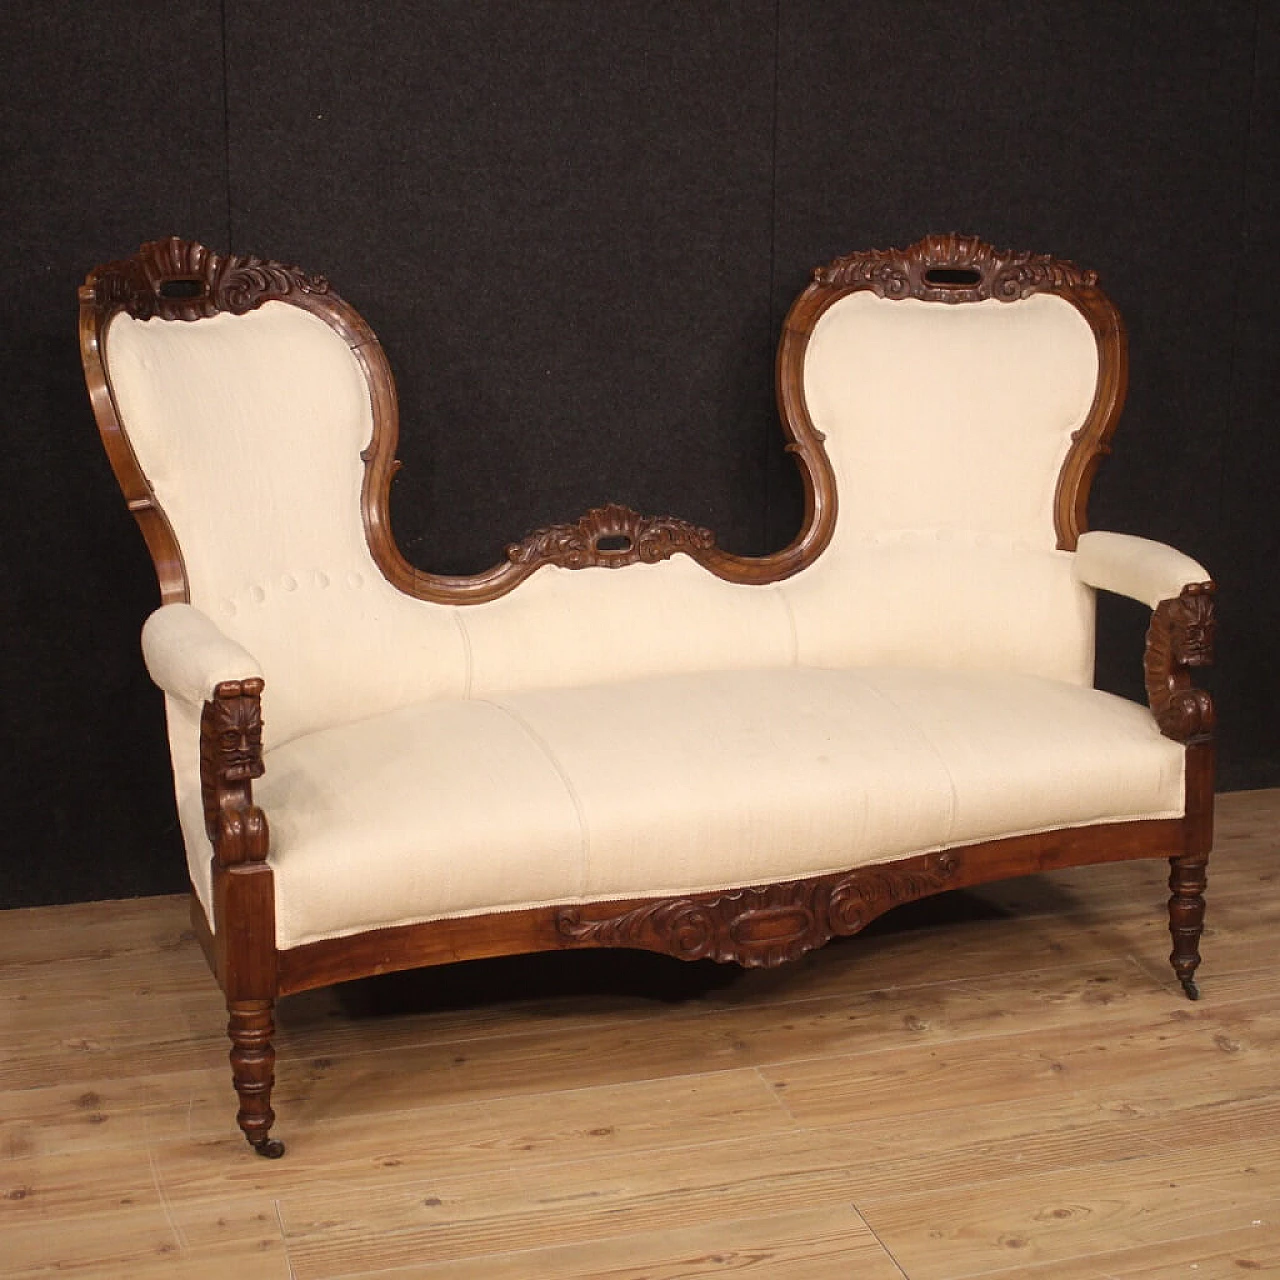 Walnut and fabric sofa with casters, late 19th century 1090590